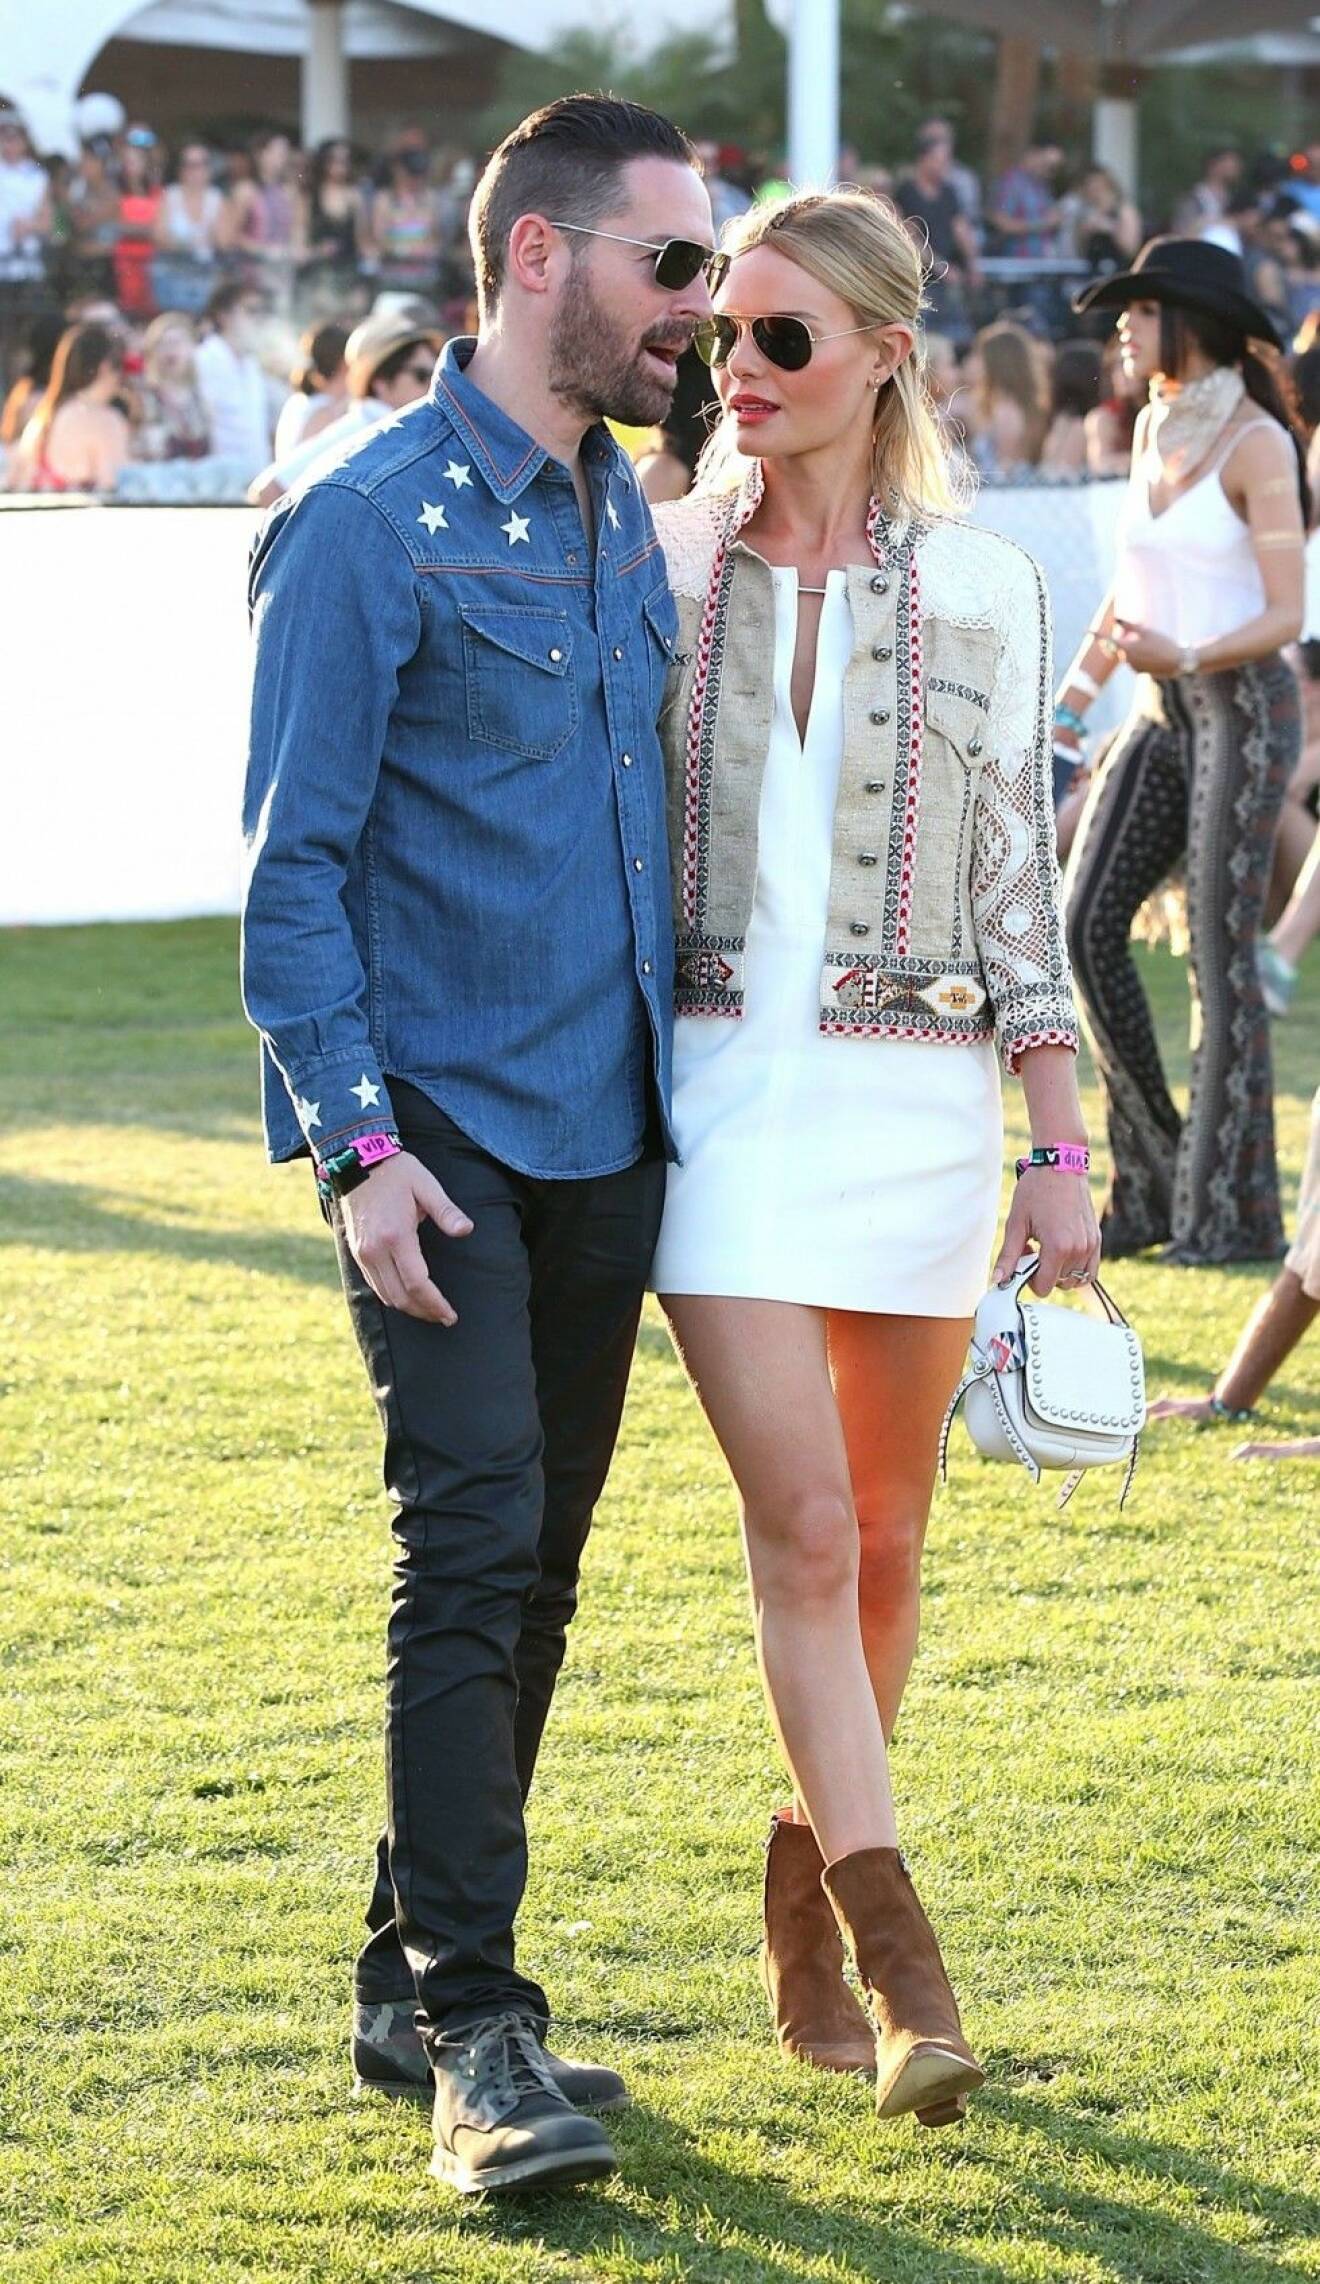 Coachella 2015 - Week 1 - Day 2 - Celebrity Sightings and Performances Featuring: Kate Bosworth Where: Los Angeles, California, United States When: 11 Apr 2015 Credit: WENN.com